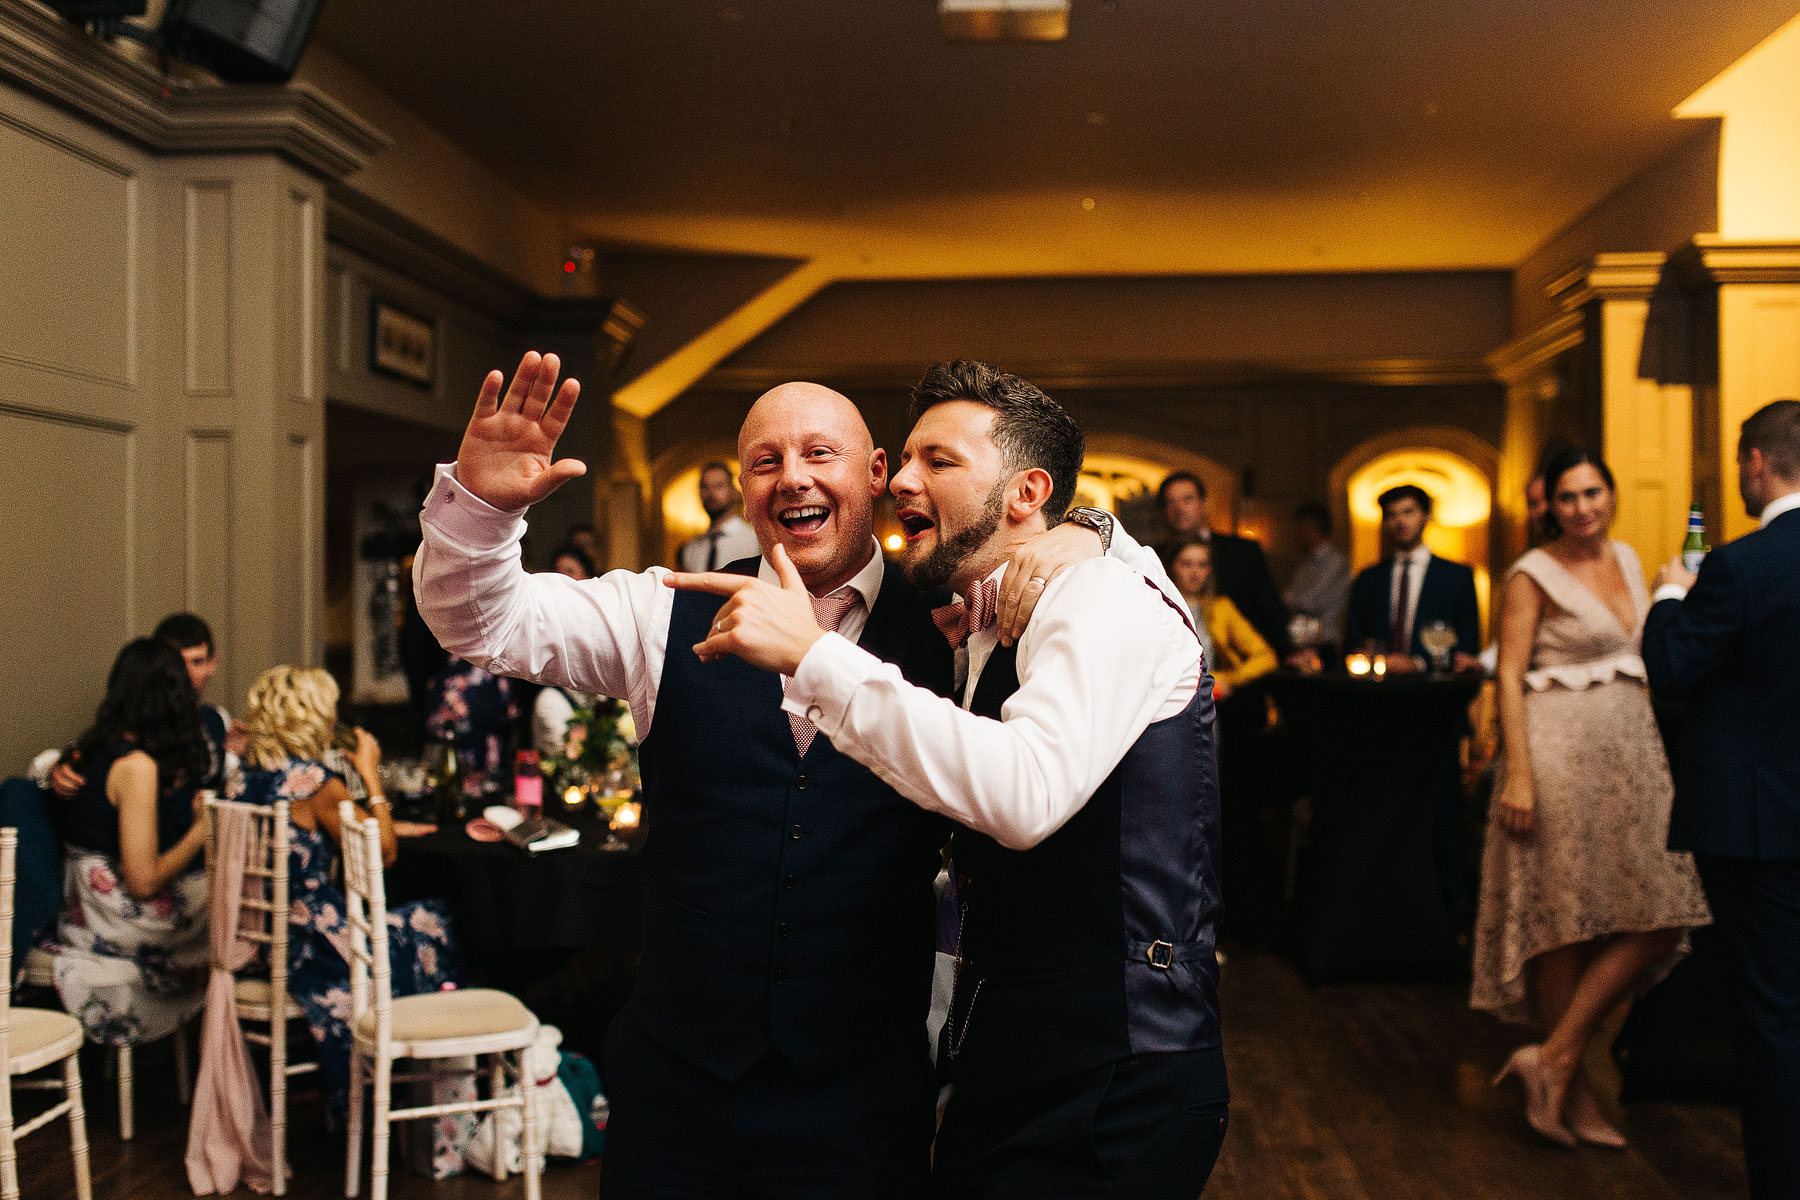 groom and friend dancing to wedding band